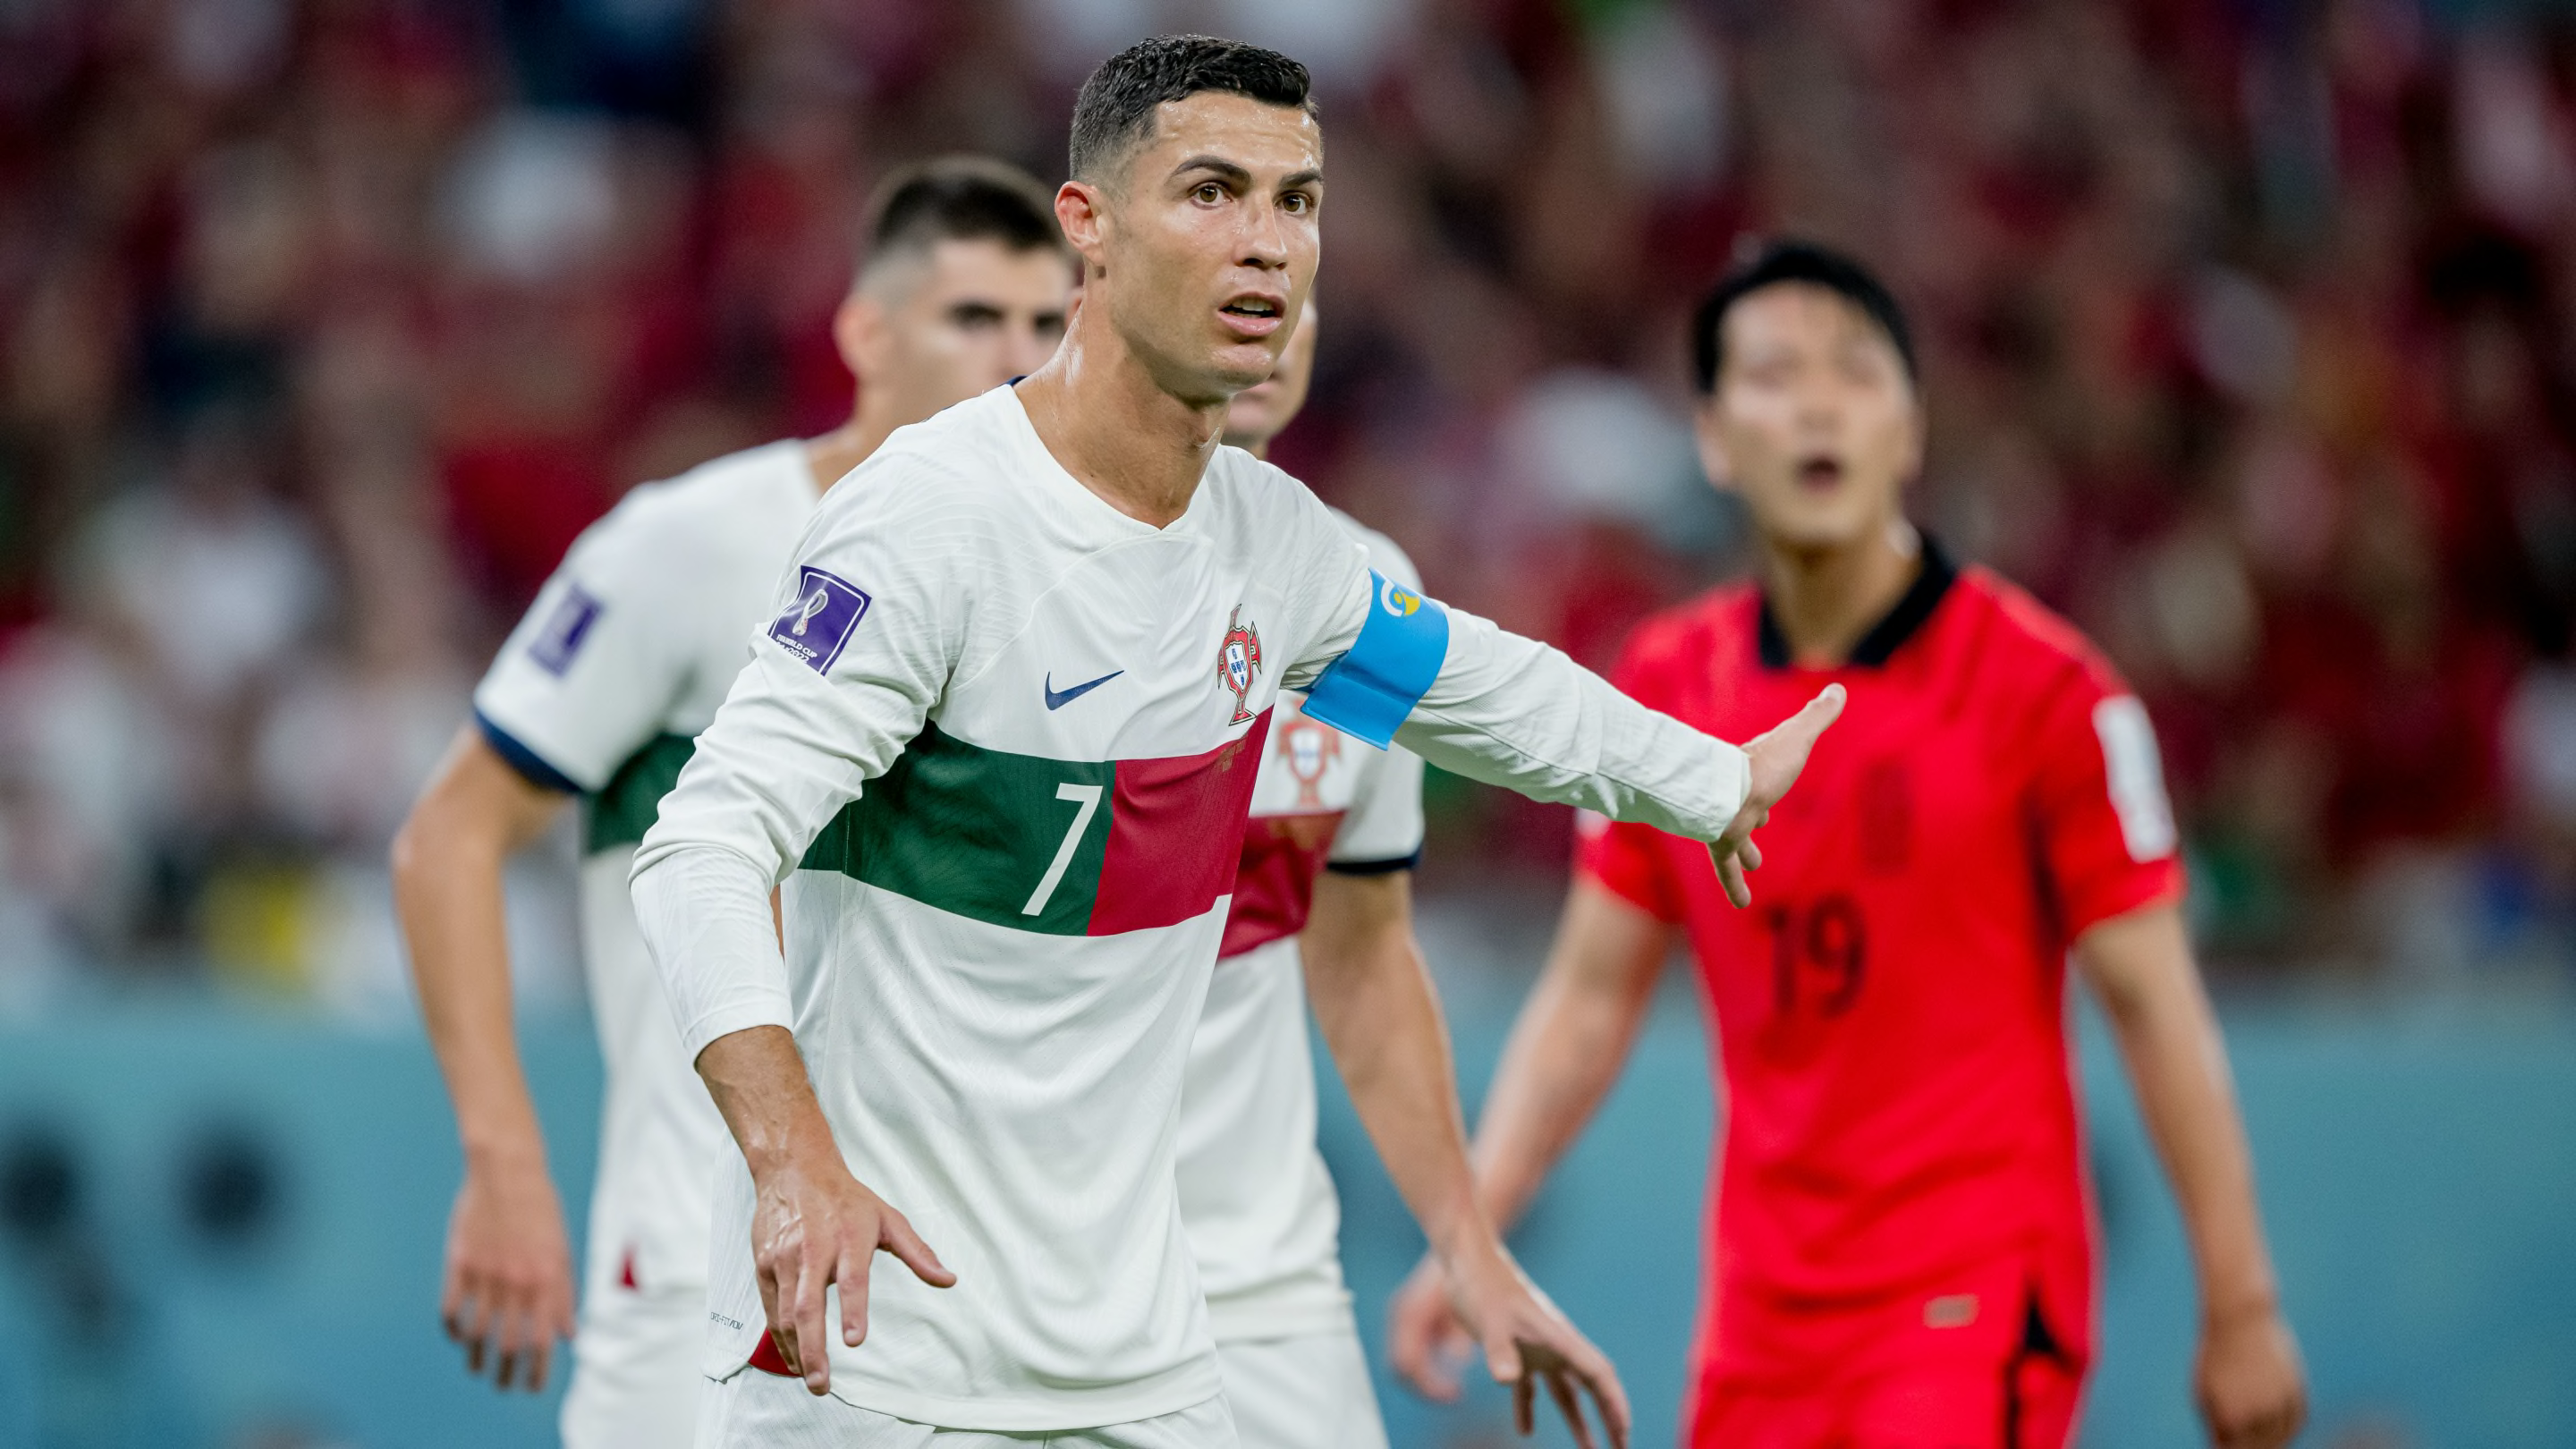 Cristiano Ronaldo explains furious reaction after Portugal substitution